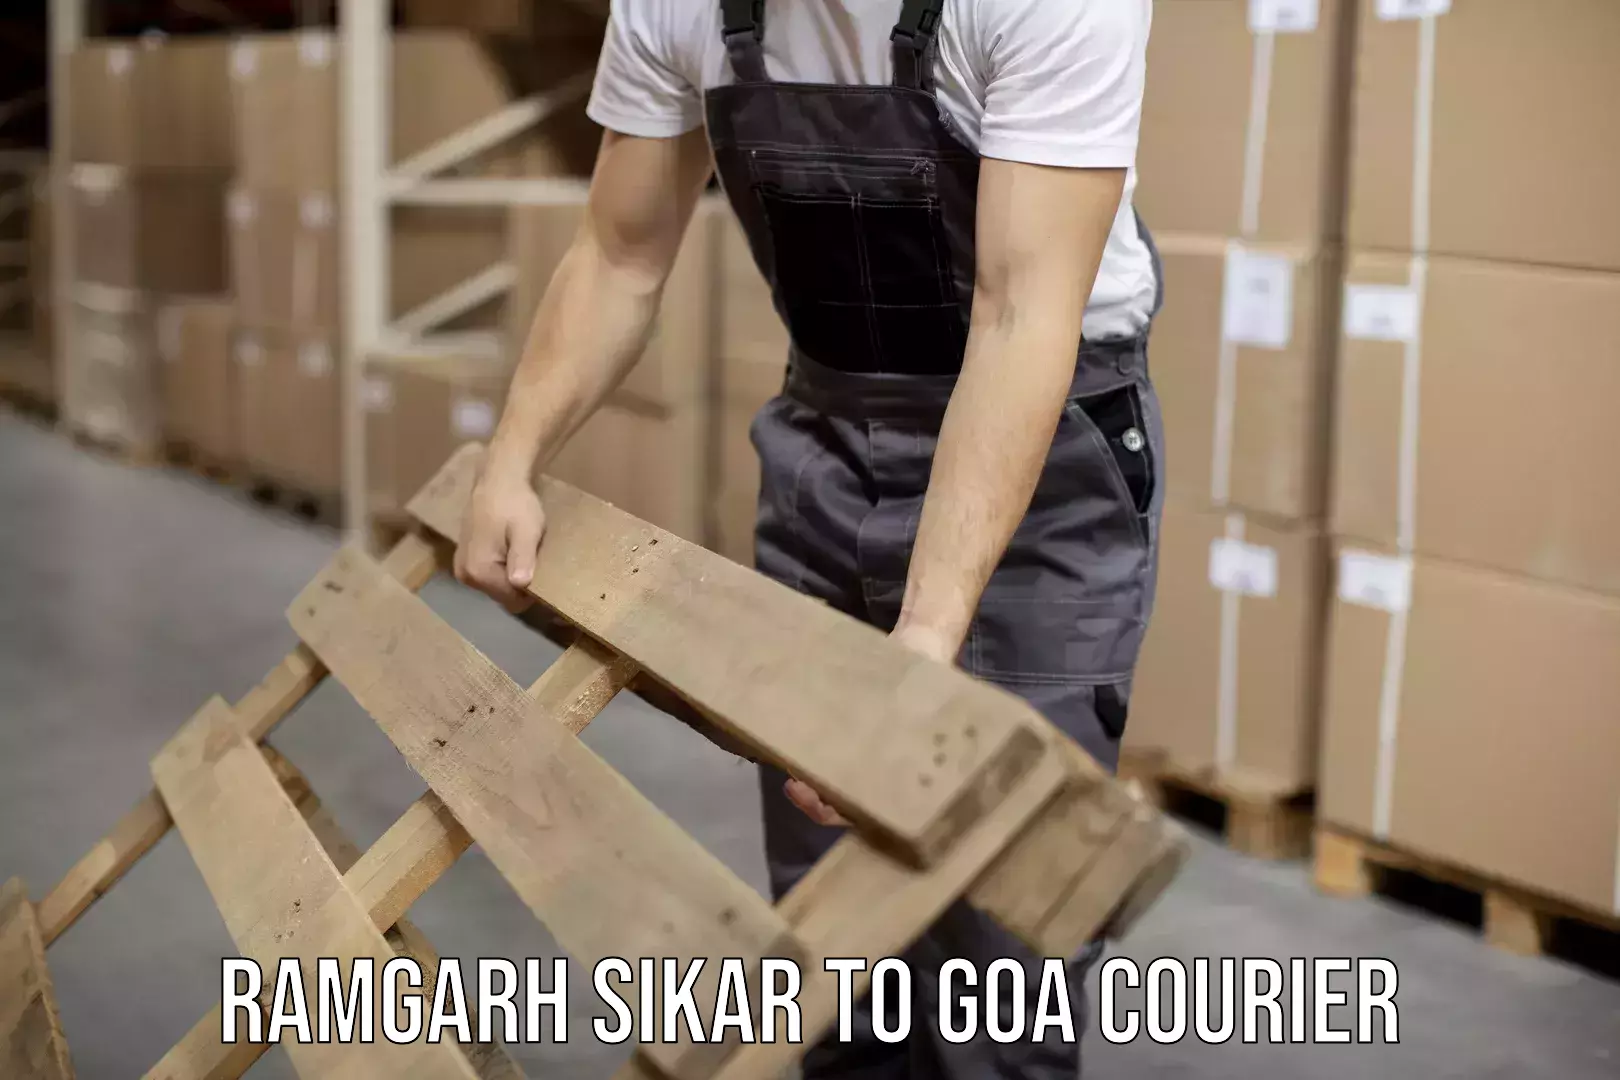 User-friendly courier app Ramgarh Sikar to South Goa